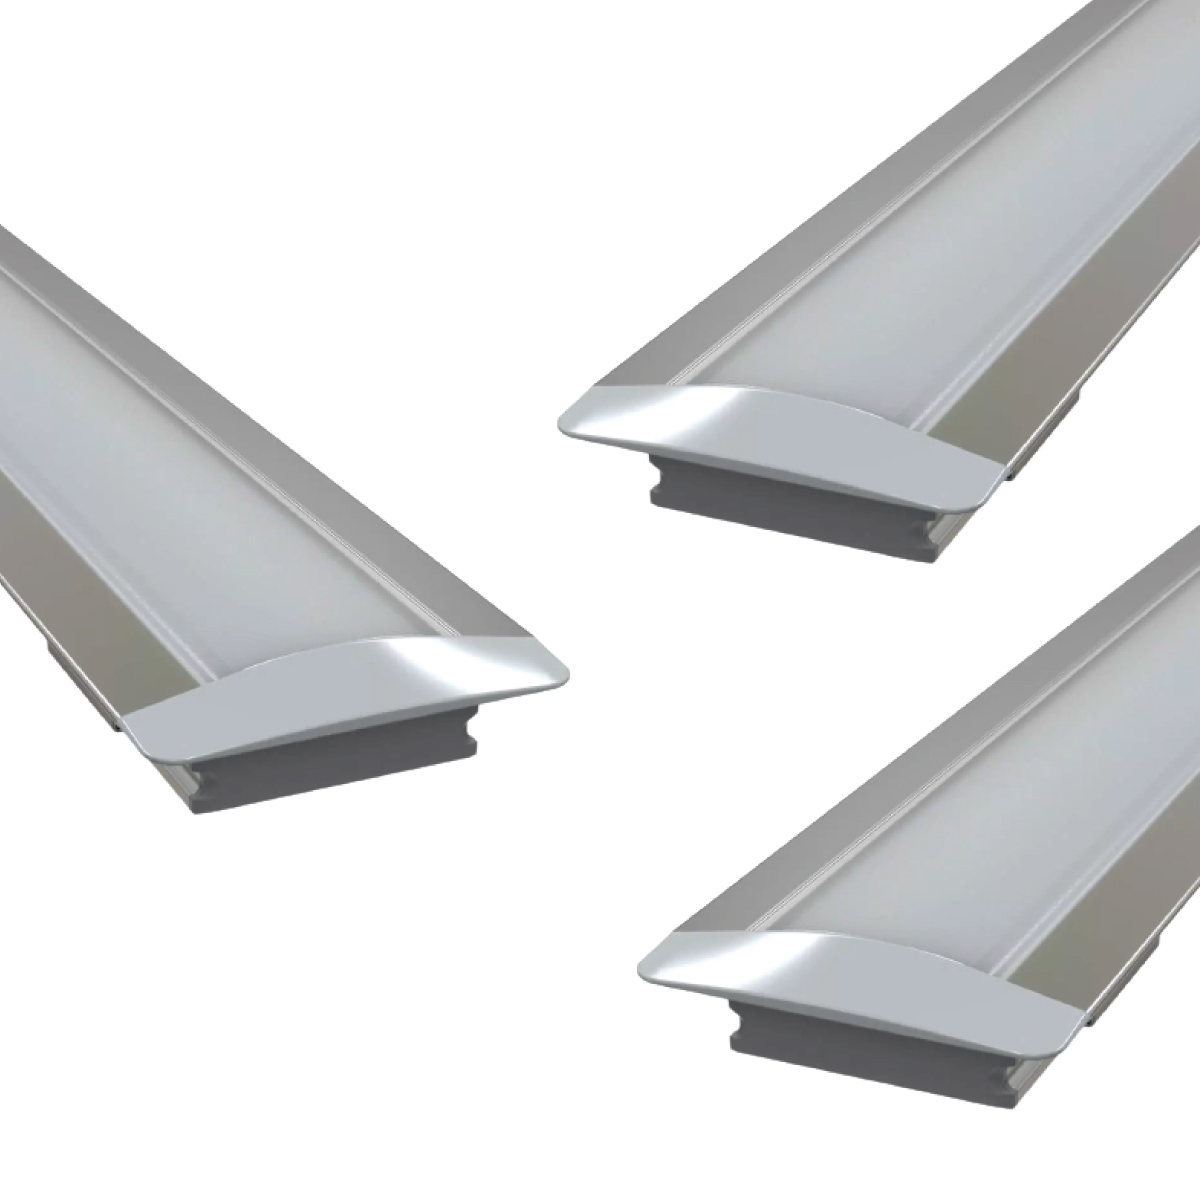 View Pack of 3 Shallow 7mm Recessed LED Aluminium Profiles 1 Metre information